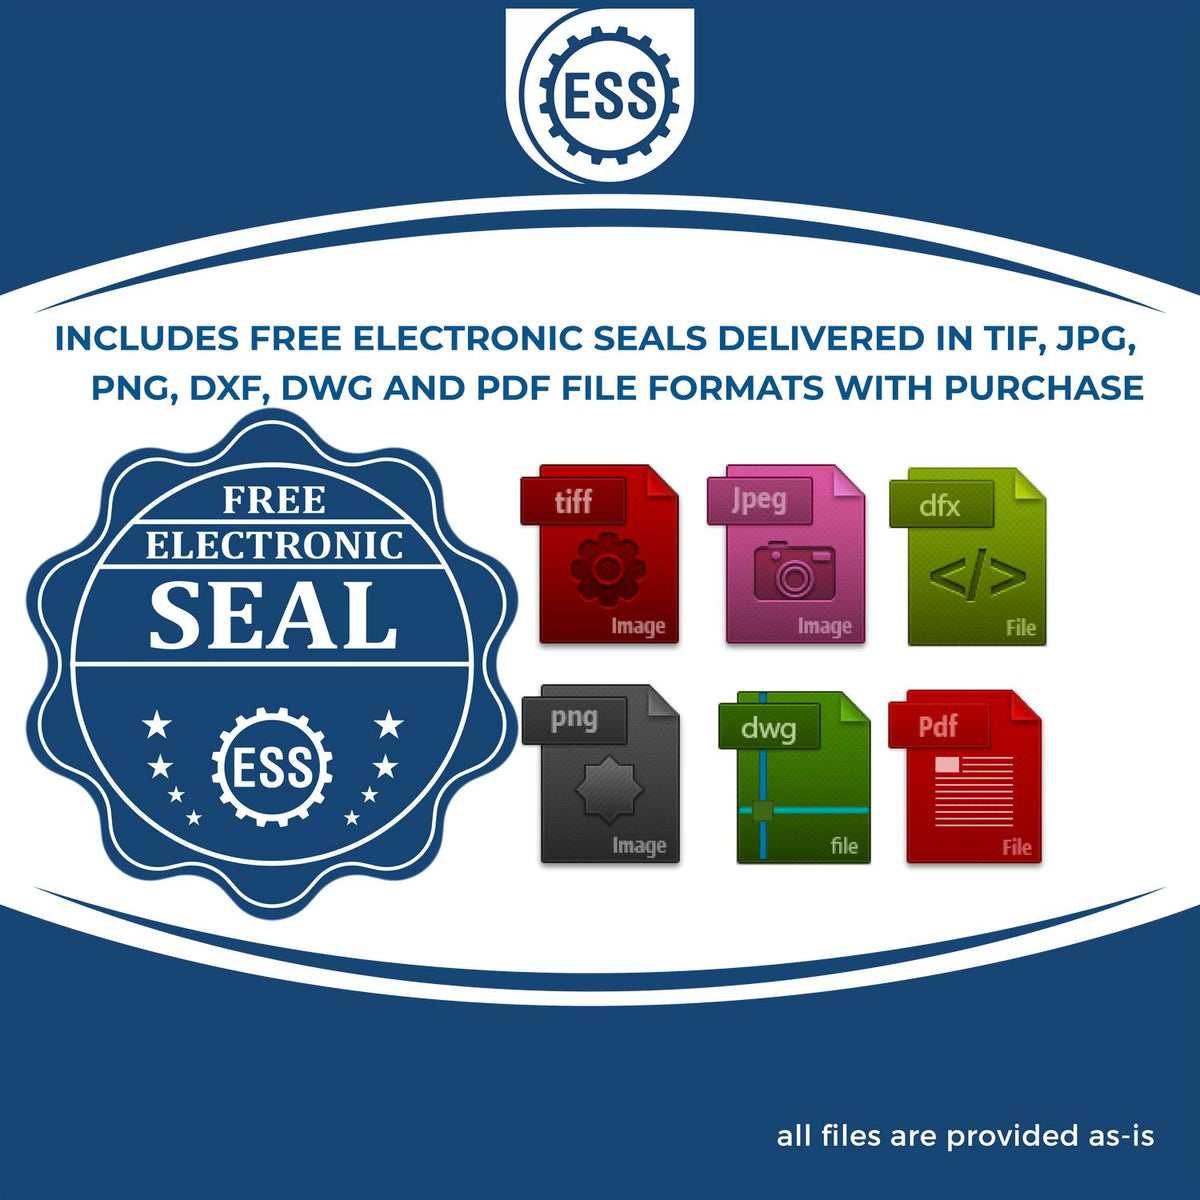 An infographic for the free electronic seal for the Slim Pre-Inked Nebraska Architect Seal Stamp illustrating the different file type icons such as DXF, DWG, TIF, JPG and PNG.